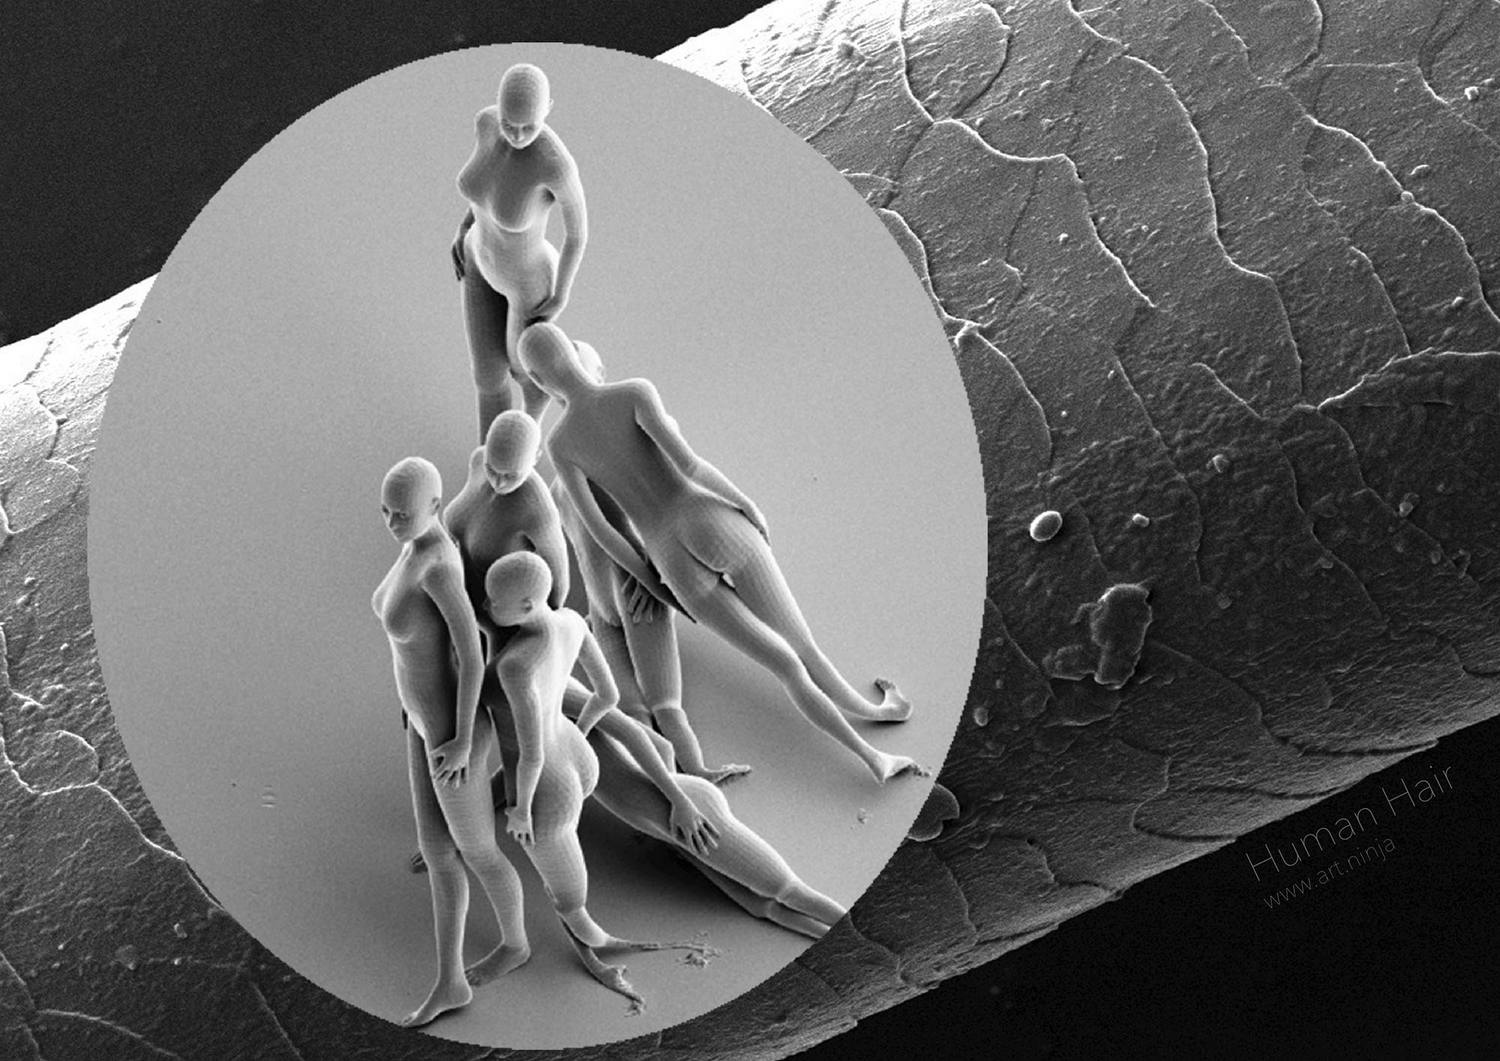 These Amazing Nudes Are The Smallest Sculptures Ever Made [NSFW]